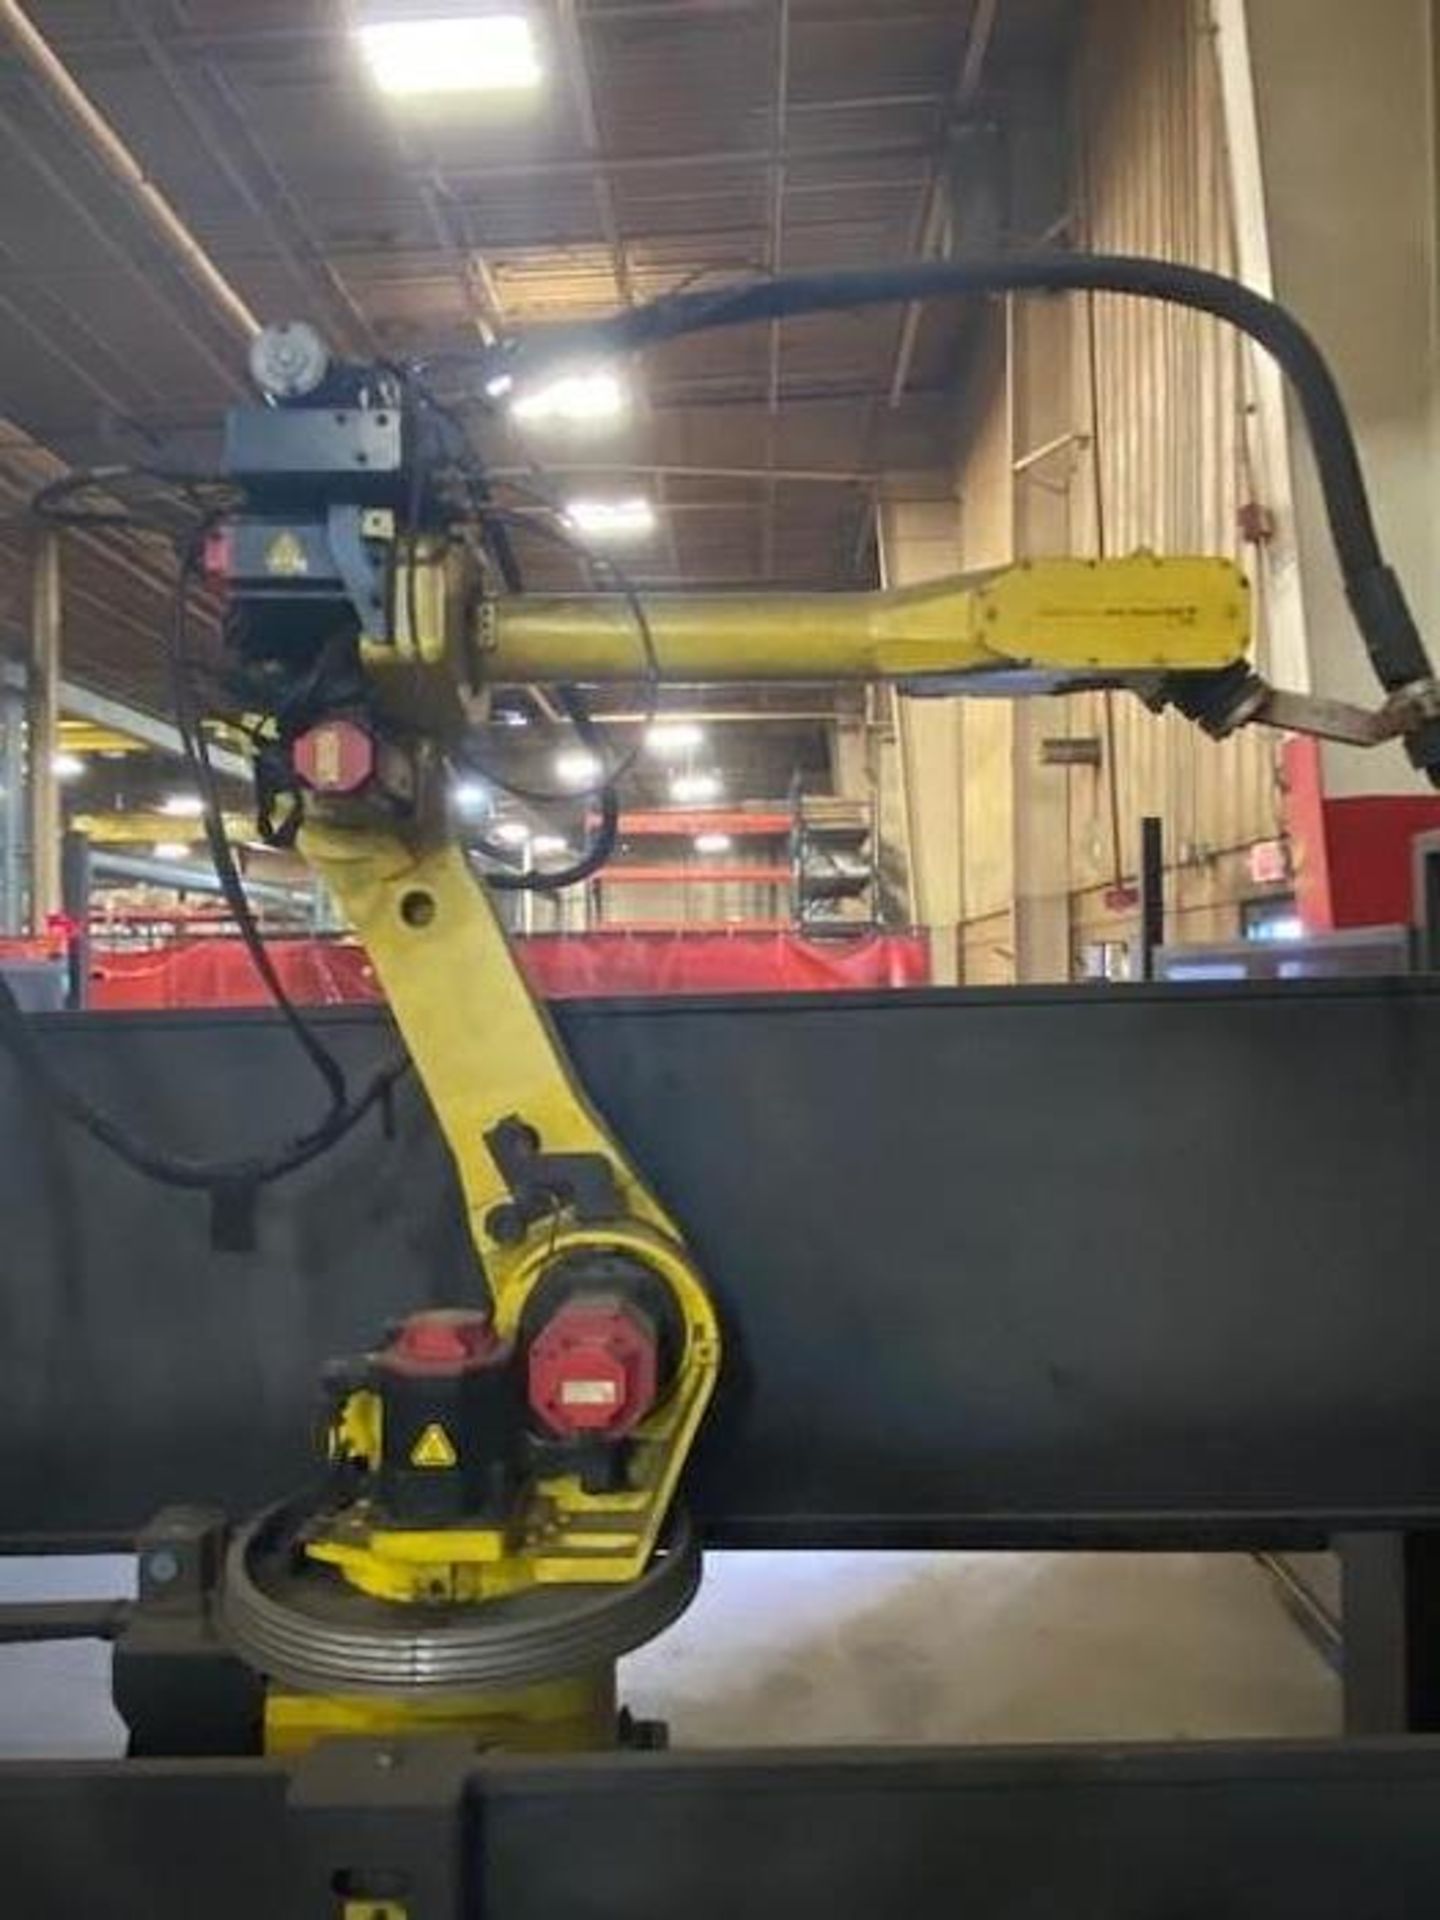 FANUC/LINCOLN DUAL TRUNION WELD CELL, FANUC ROBOT ARCMATE 120iB/10L WITH R-J3iB CONTROL